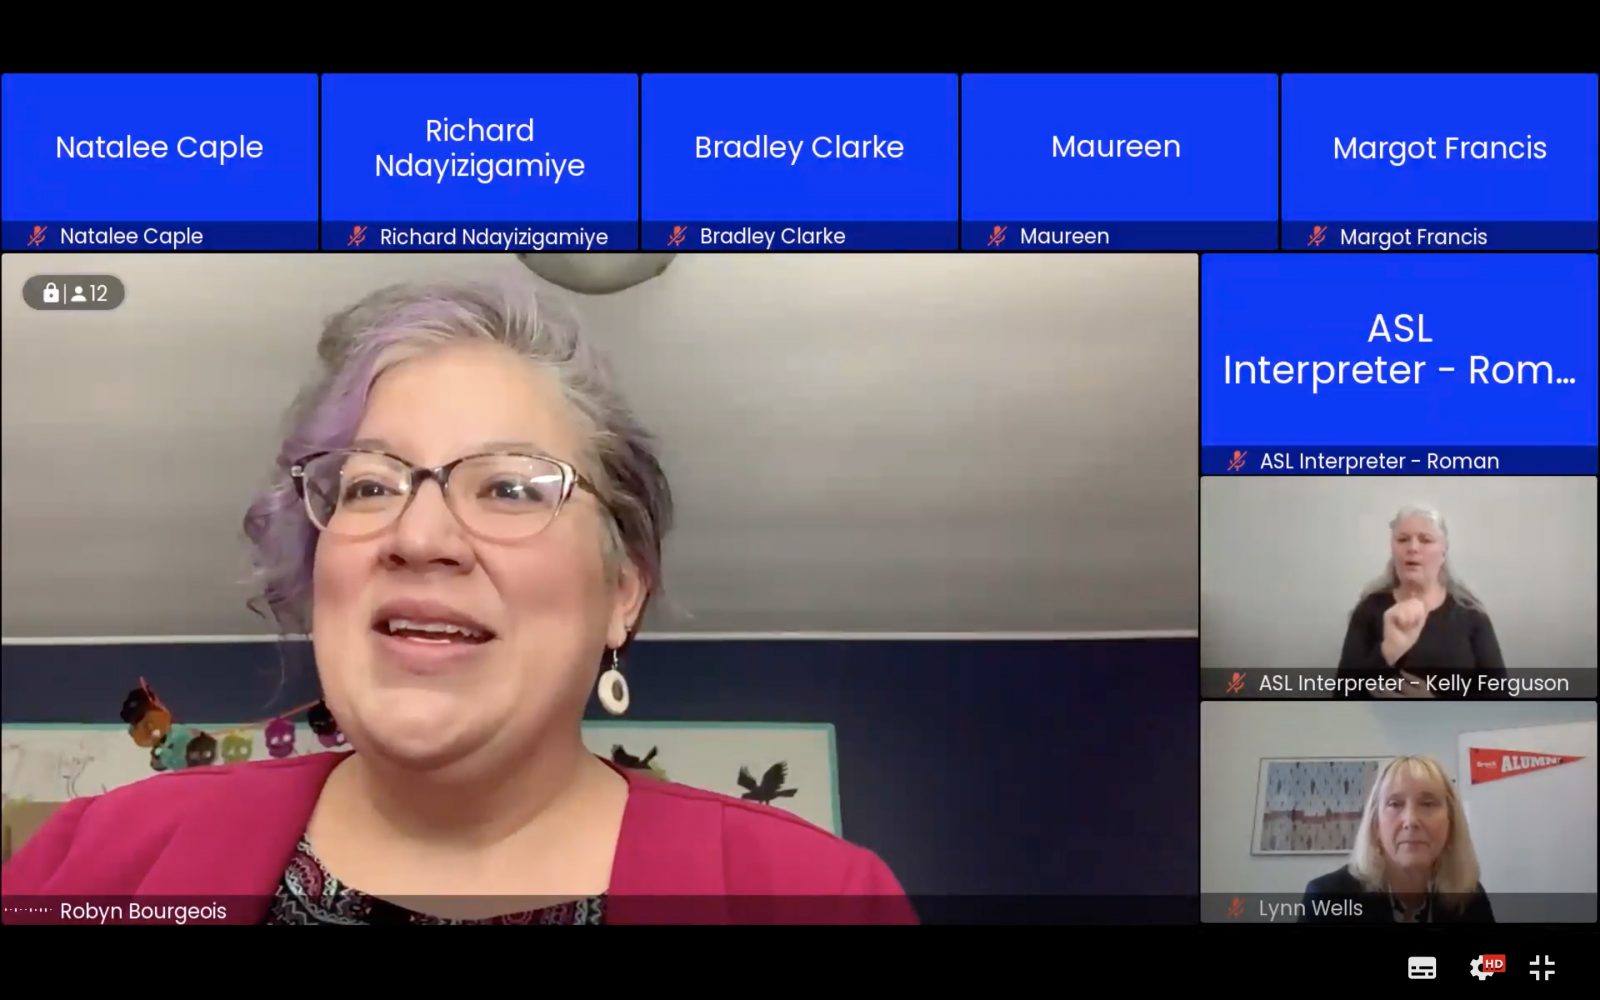 A screenshot of participants in an online meeting. A large box in the centre shows a woman speaking. Several blue boxes around the woman represent other people who will be presenting at the meeting. Their video cameras are off so all that is seen is their name written in text. Two of the small boxes show the faces of two other women.